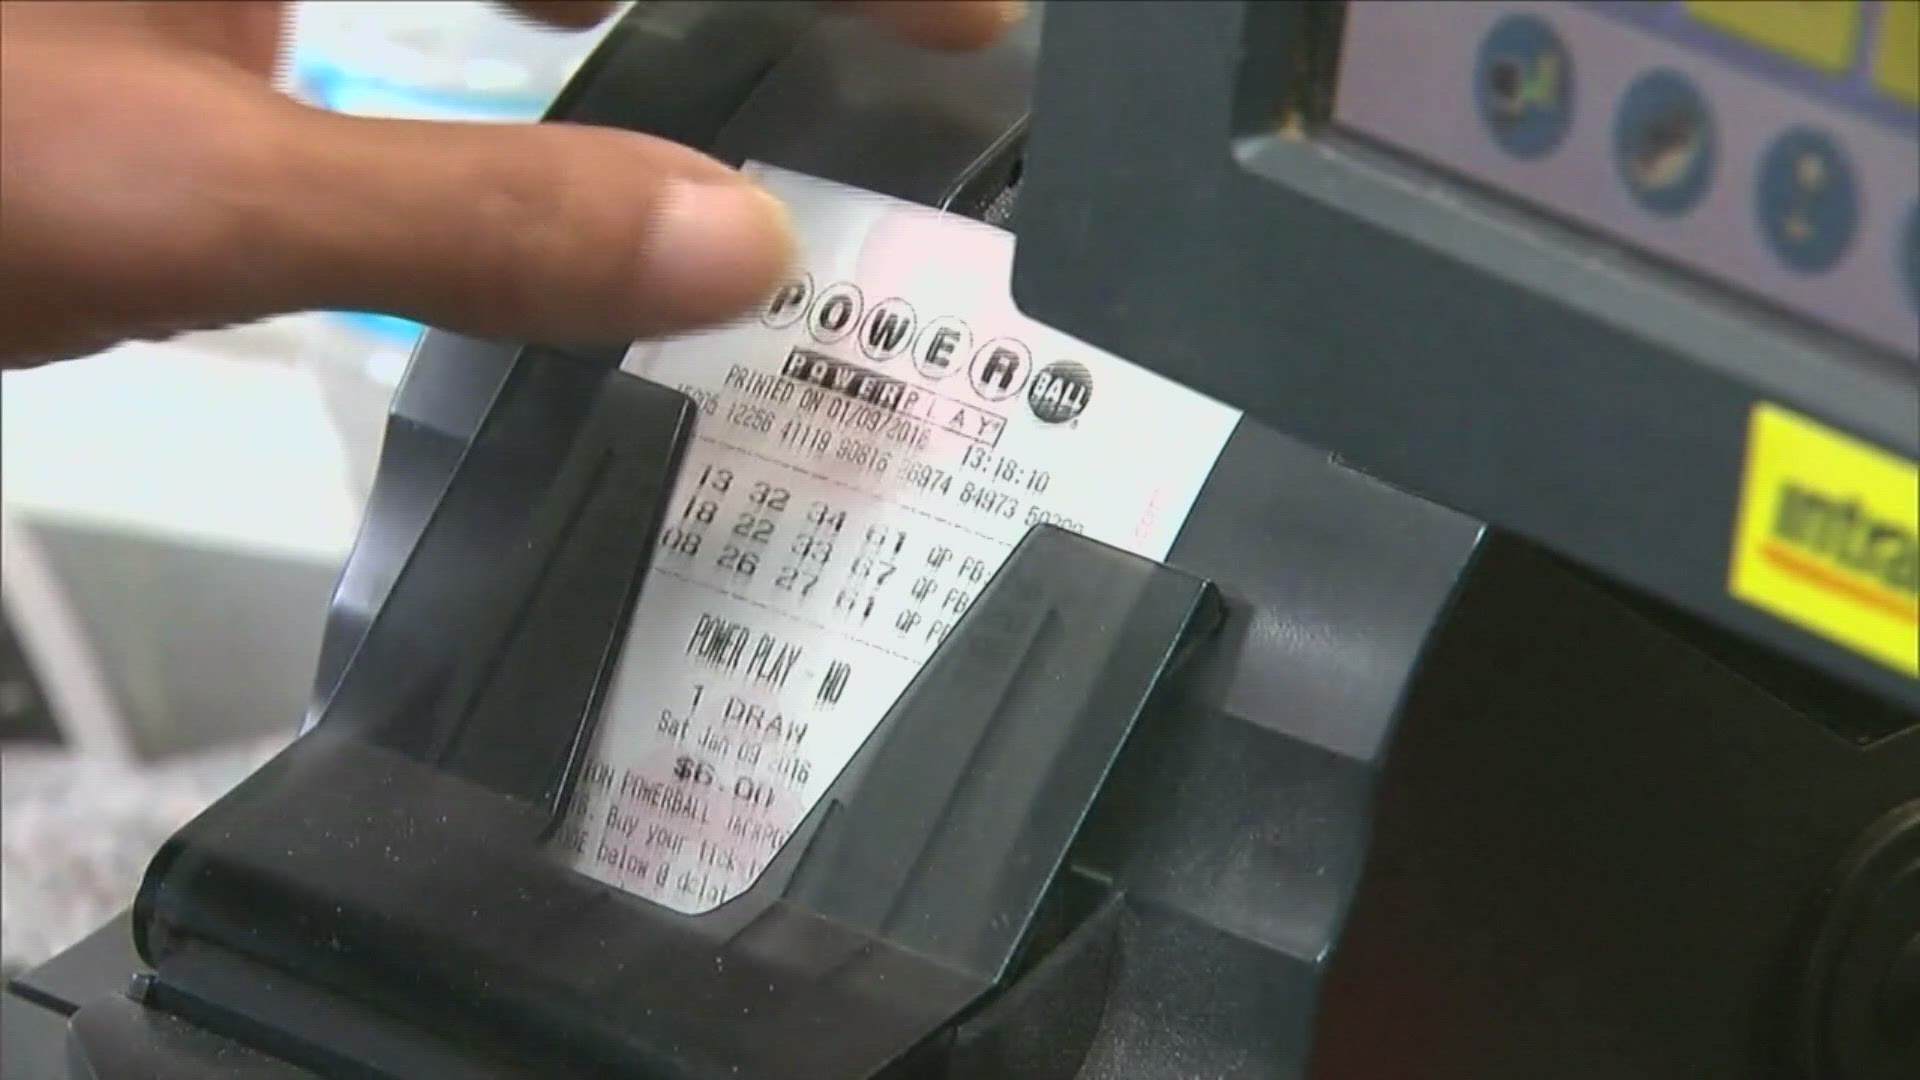 The Powerball jackpot is up to $785 million after no big winner in Saturday night's drawing.